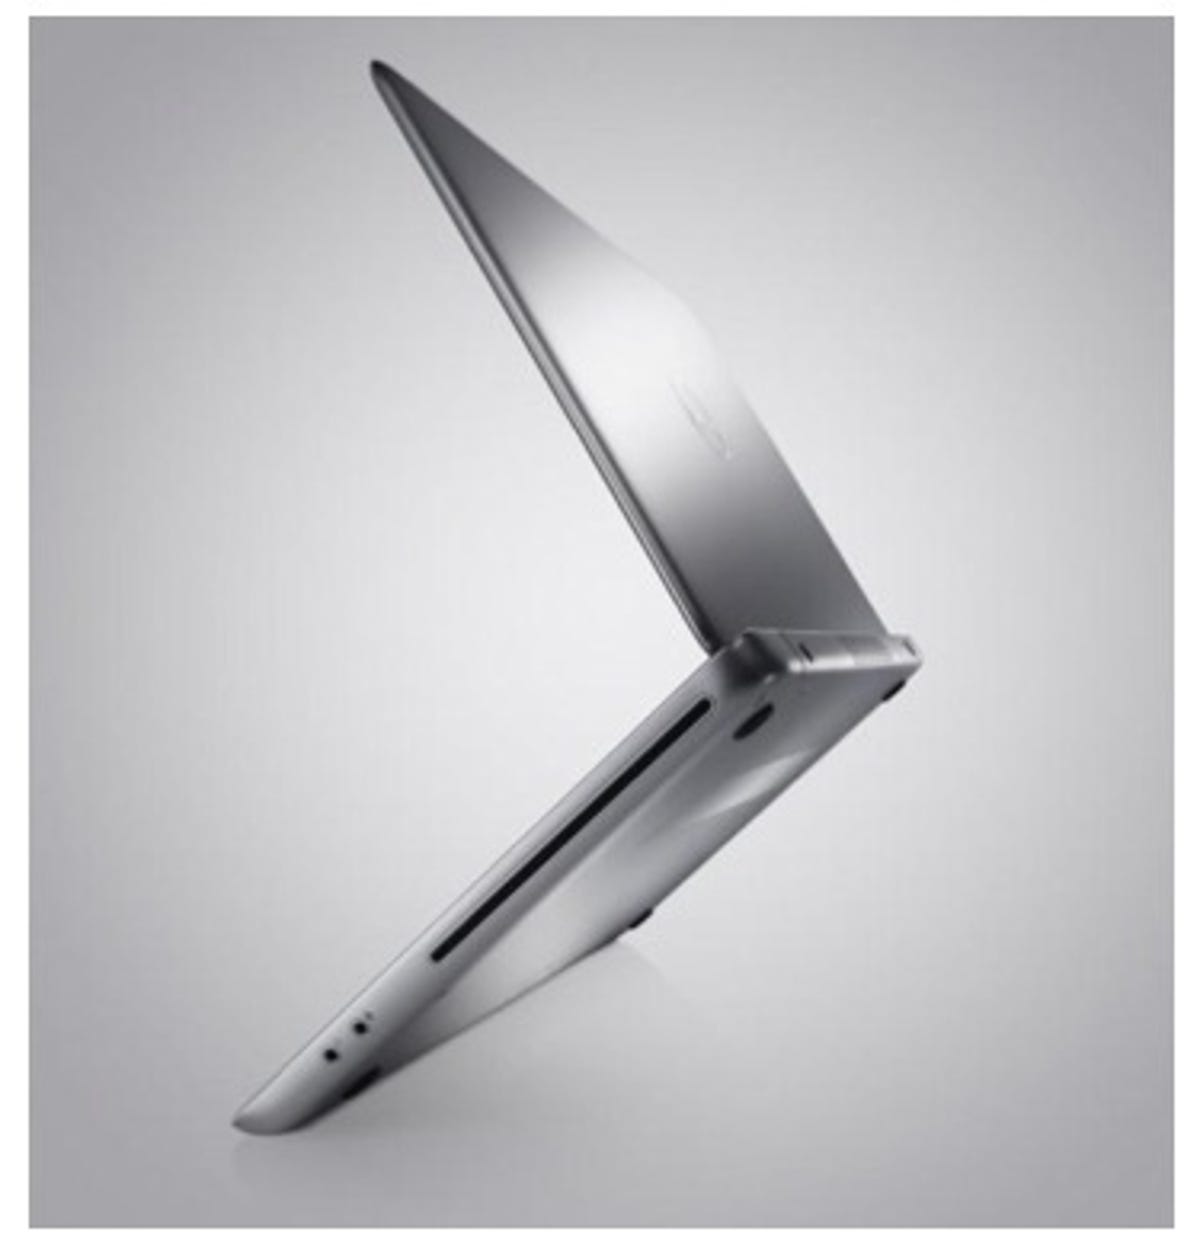 The Dell XPS 15z is being positioned as the successor to the Adamo, Dell's ultrathin laptop line that was discontinued.